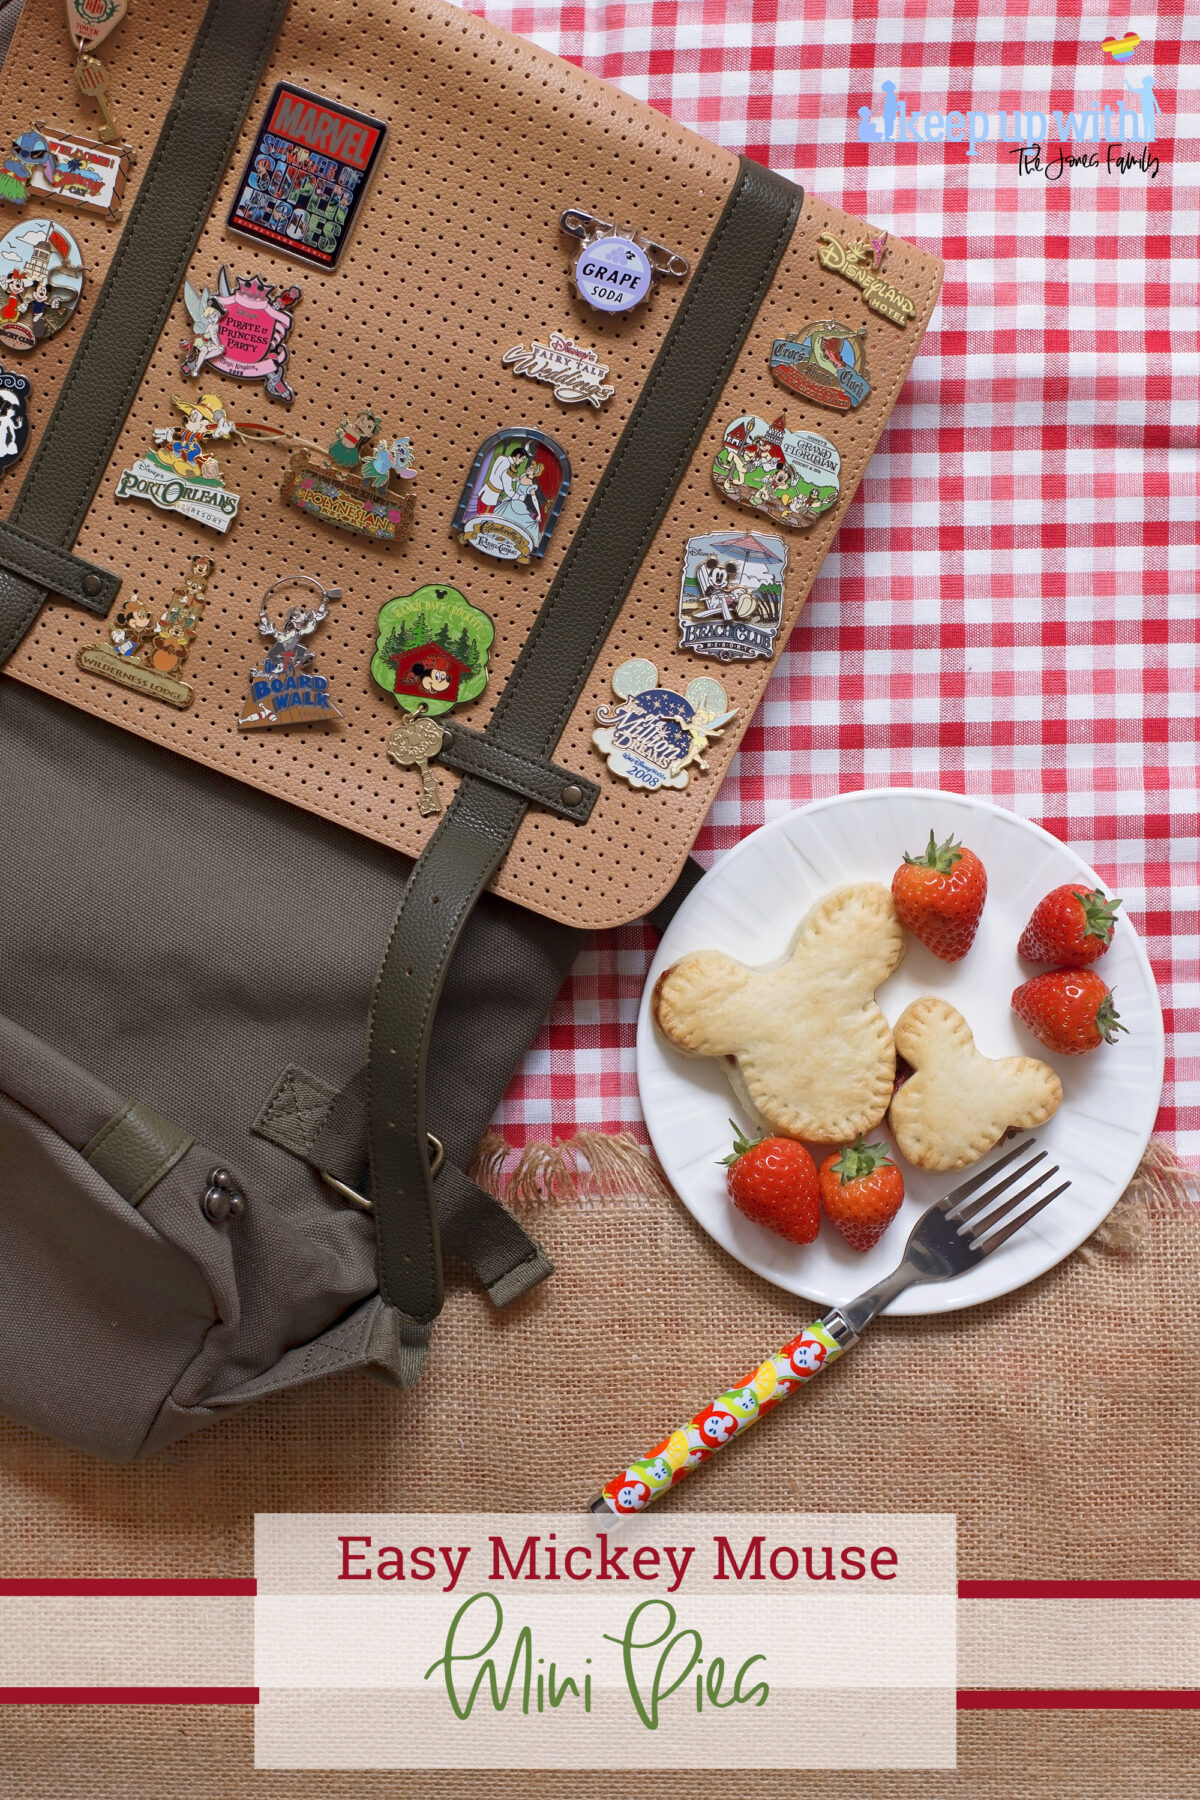 Image shows a flatlay of a red gingham checked tablecloth, overlaid with a jute burlap material with a fringe. On top is a ShopDisneyUK rucksack with many Disney pins from Disney's fairytale weddings, Port Orleans, Castaway Cay, Disneyland Hotel, Cinderellas Table and many more. Next to the bag is a white Vera Wang sideplate with two Mickey Mouse shaped shortcrust pies on. One is larger than the other. There is a ShopDisney fork balancing on the plate with a summer citrus and apples pattern on it.  The image is watermarked by Keep up with the Jones Family. 